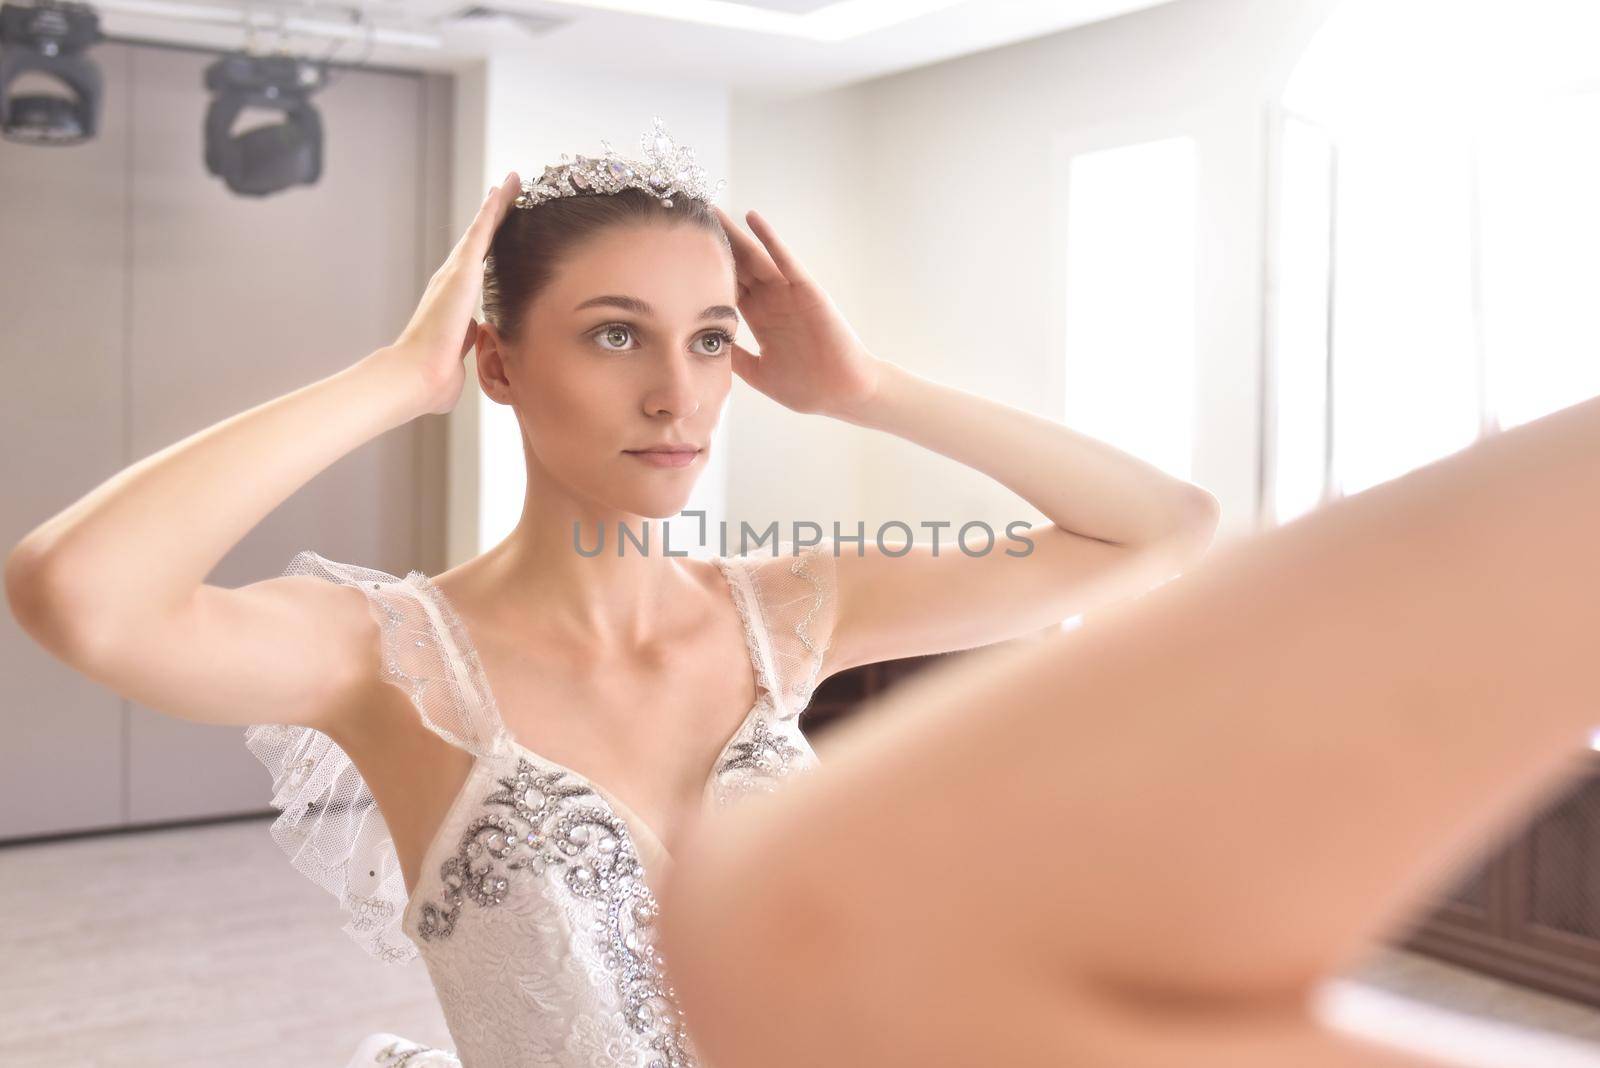 A young woman in a cream dress applies makeup and wears a crown in front of the mirror. The concept of beauty